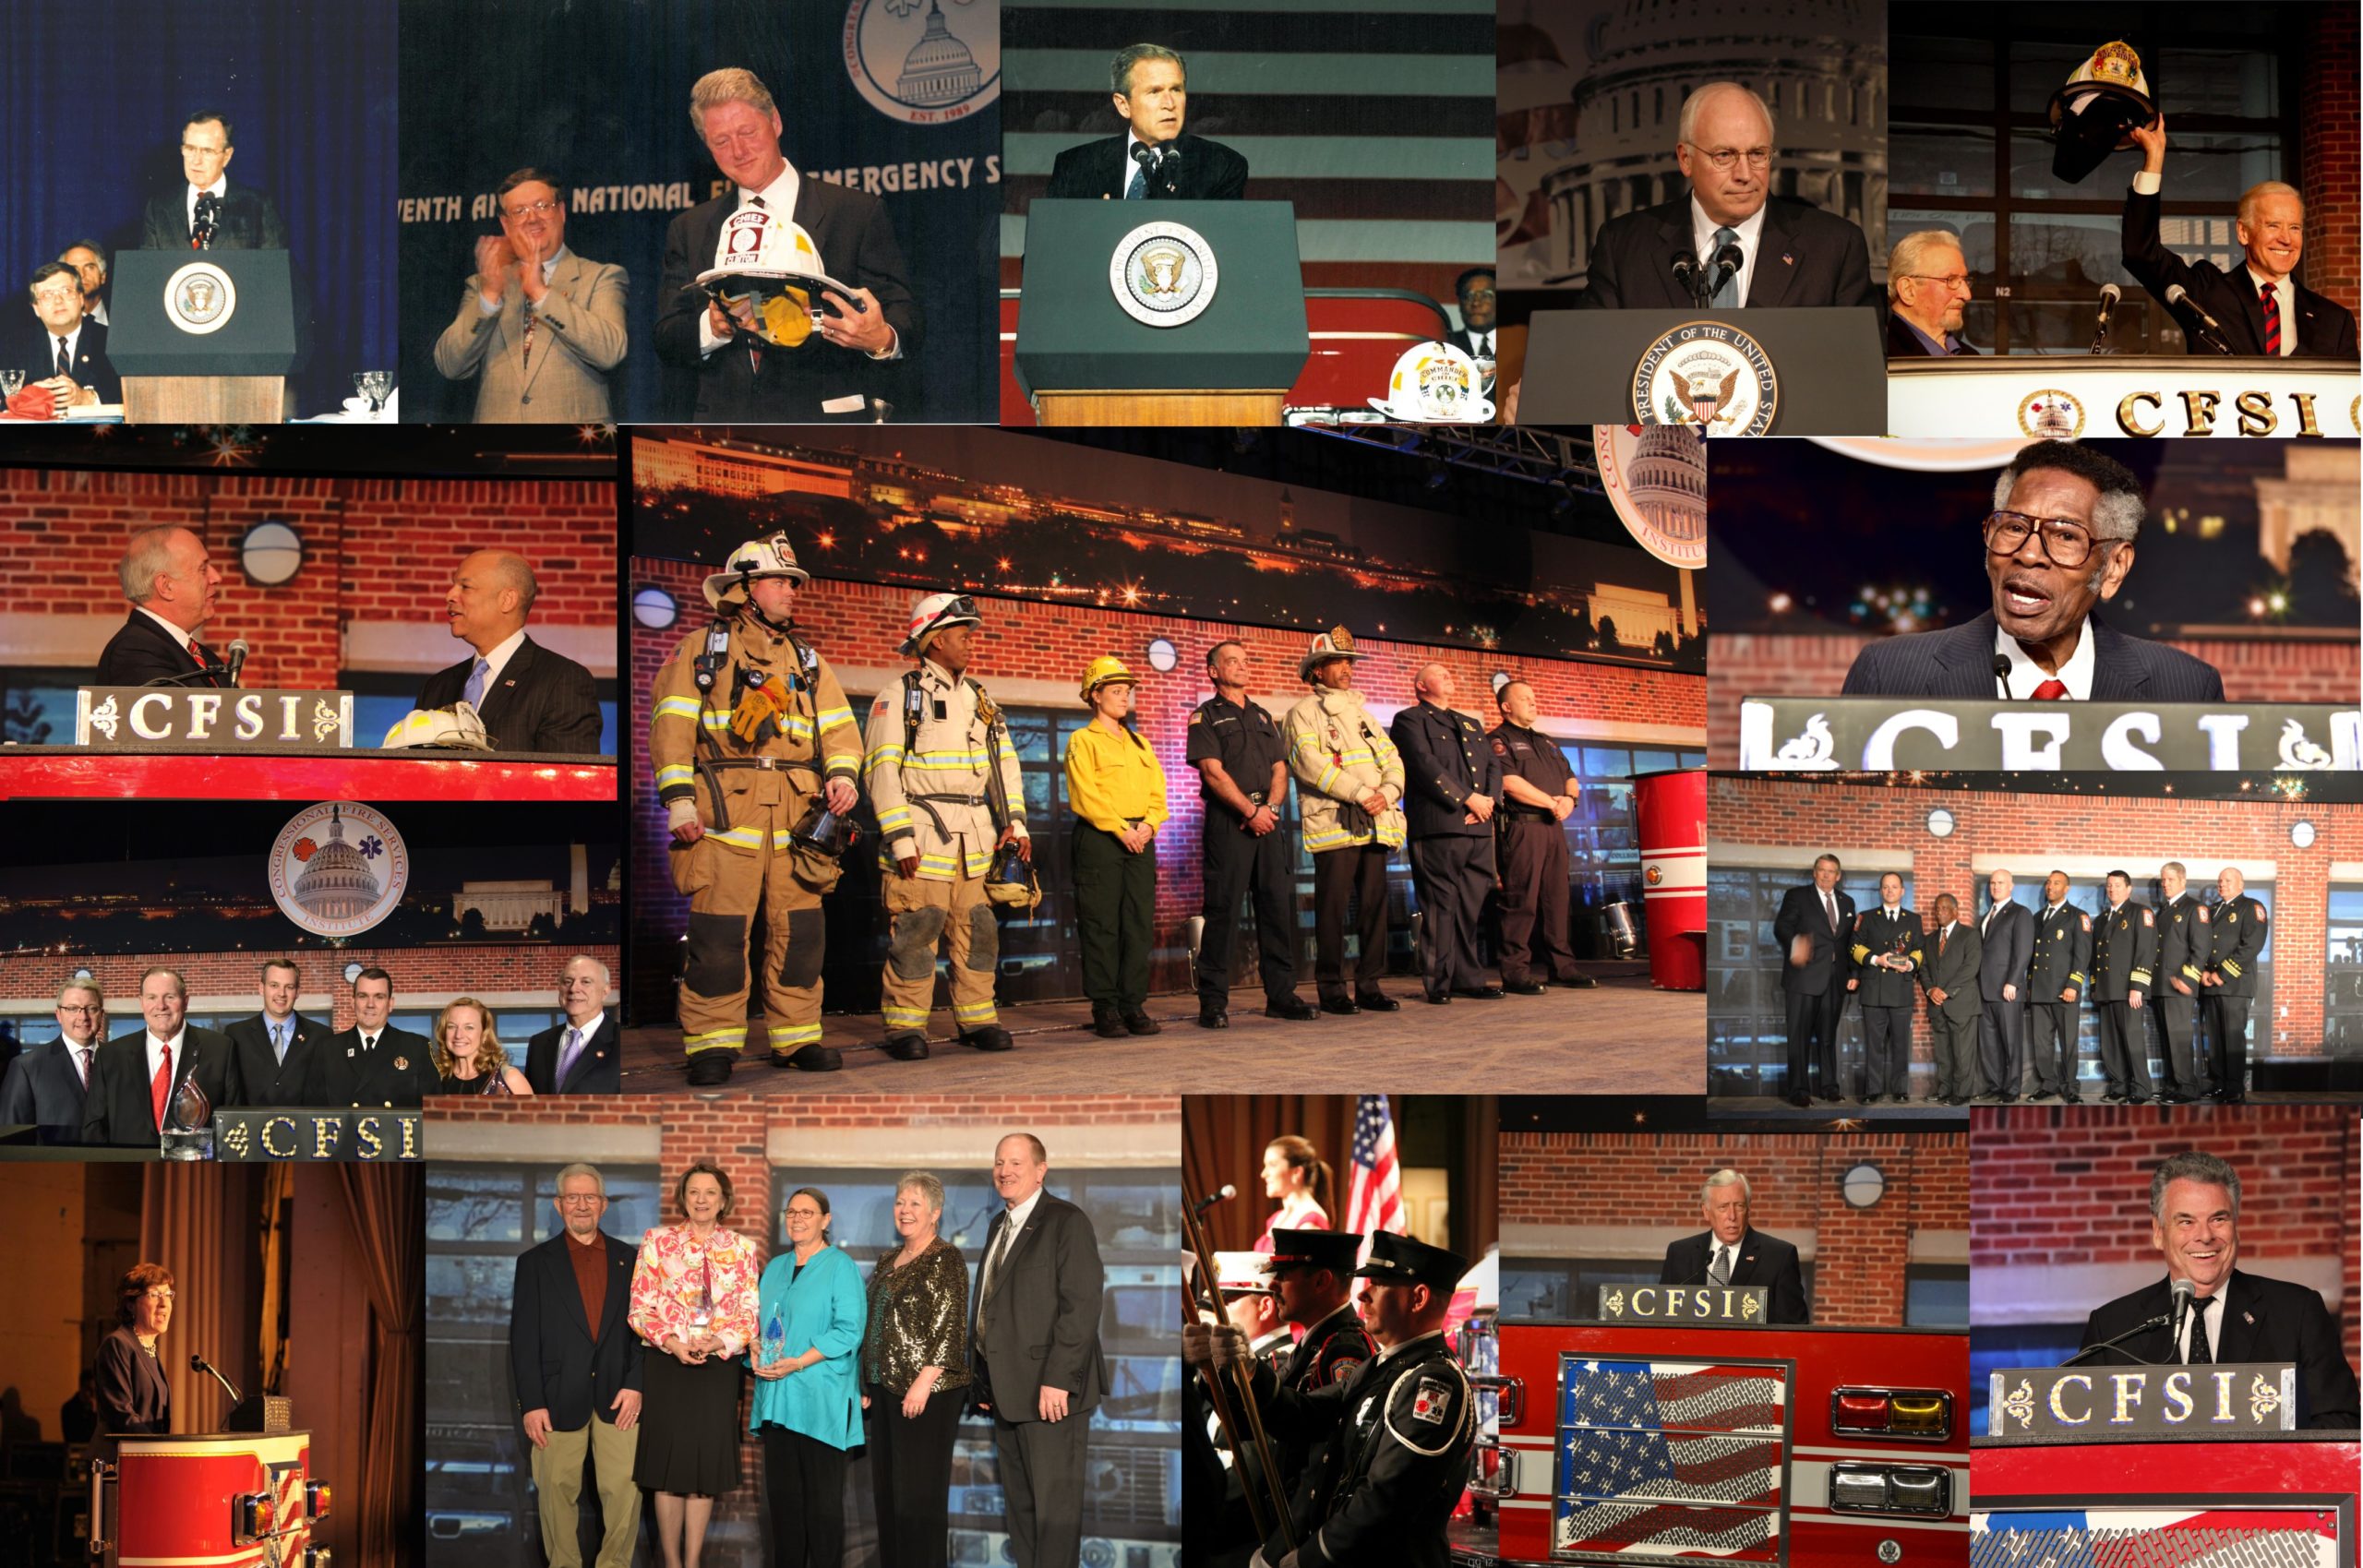 2022 National Fire and Emergency Services Dinner & Symposium - Congressional Fire Services Institute